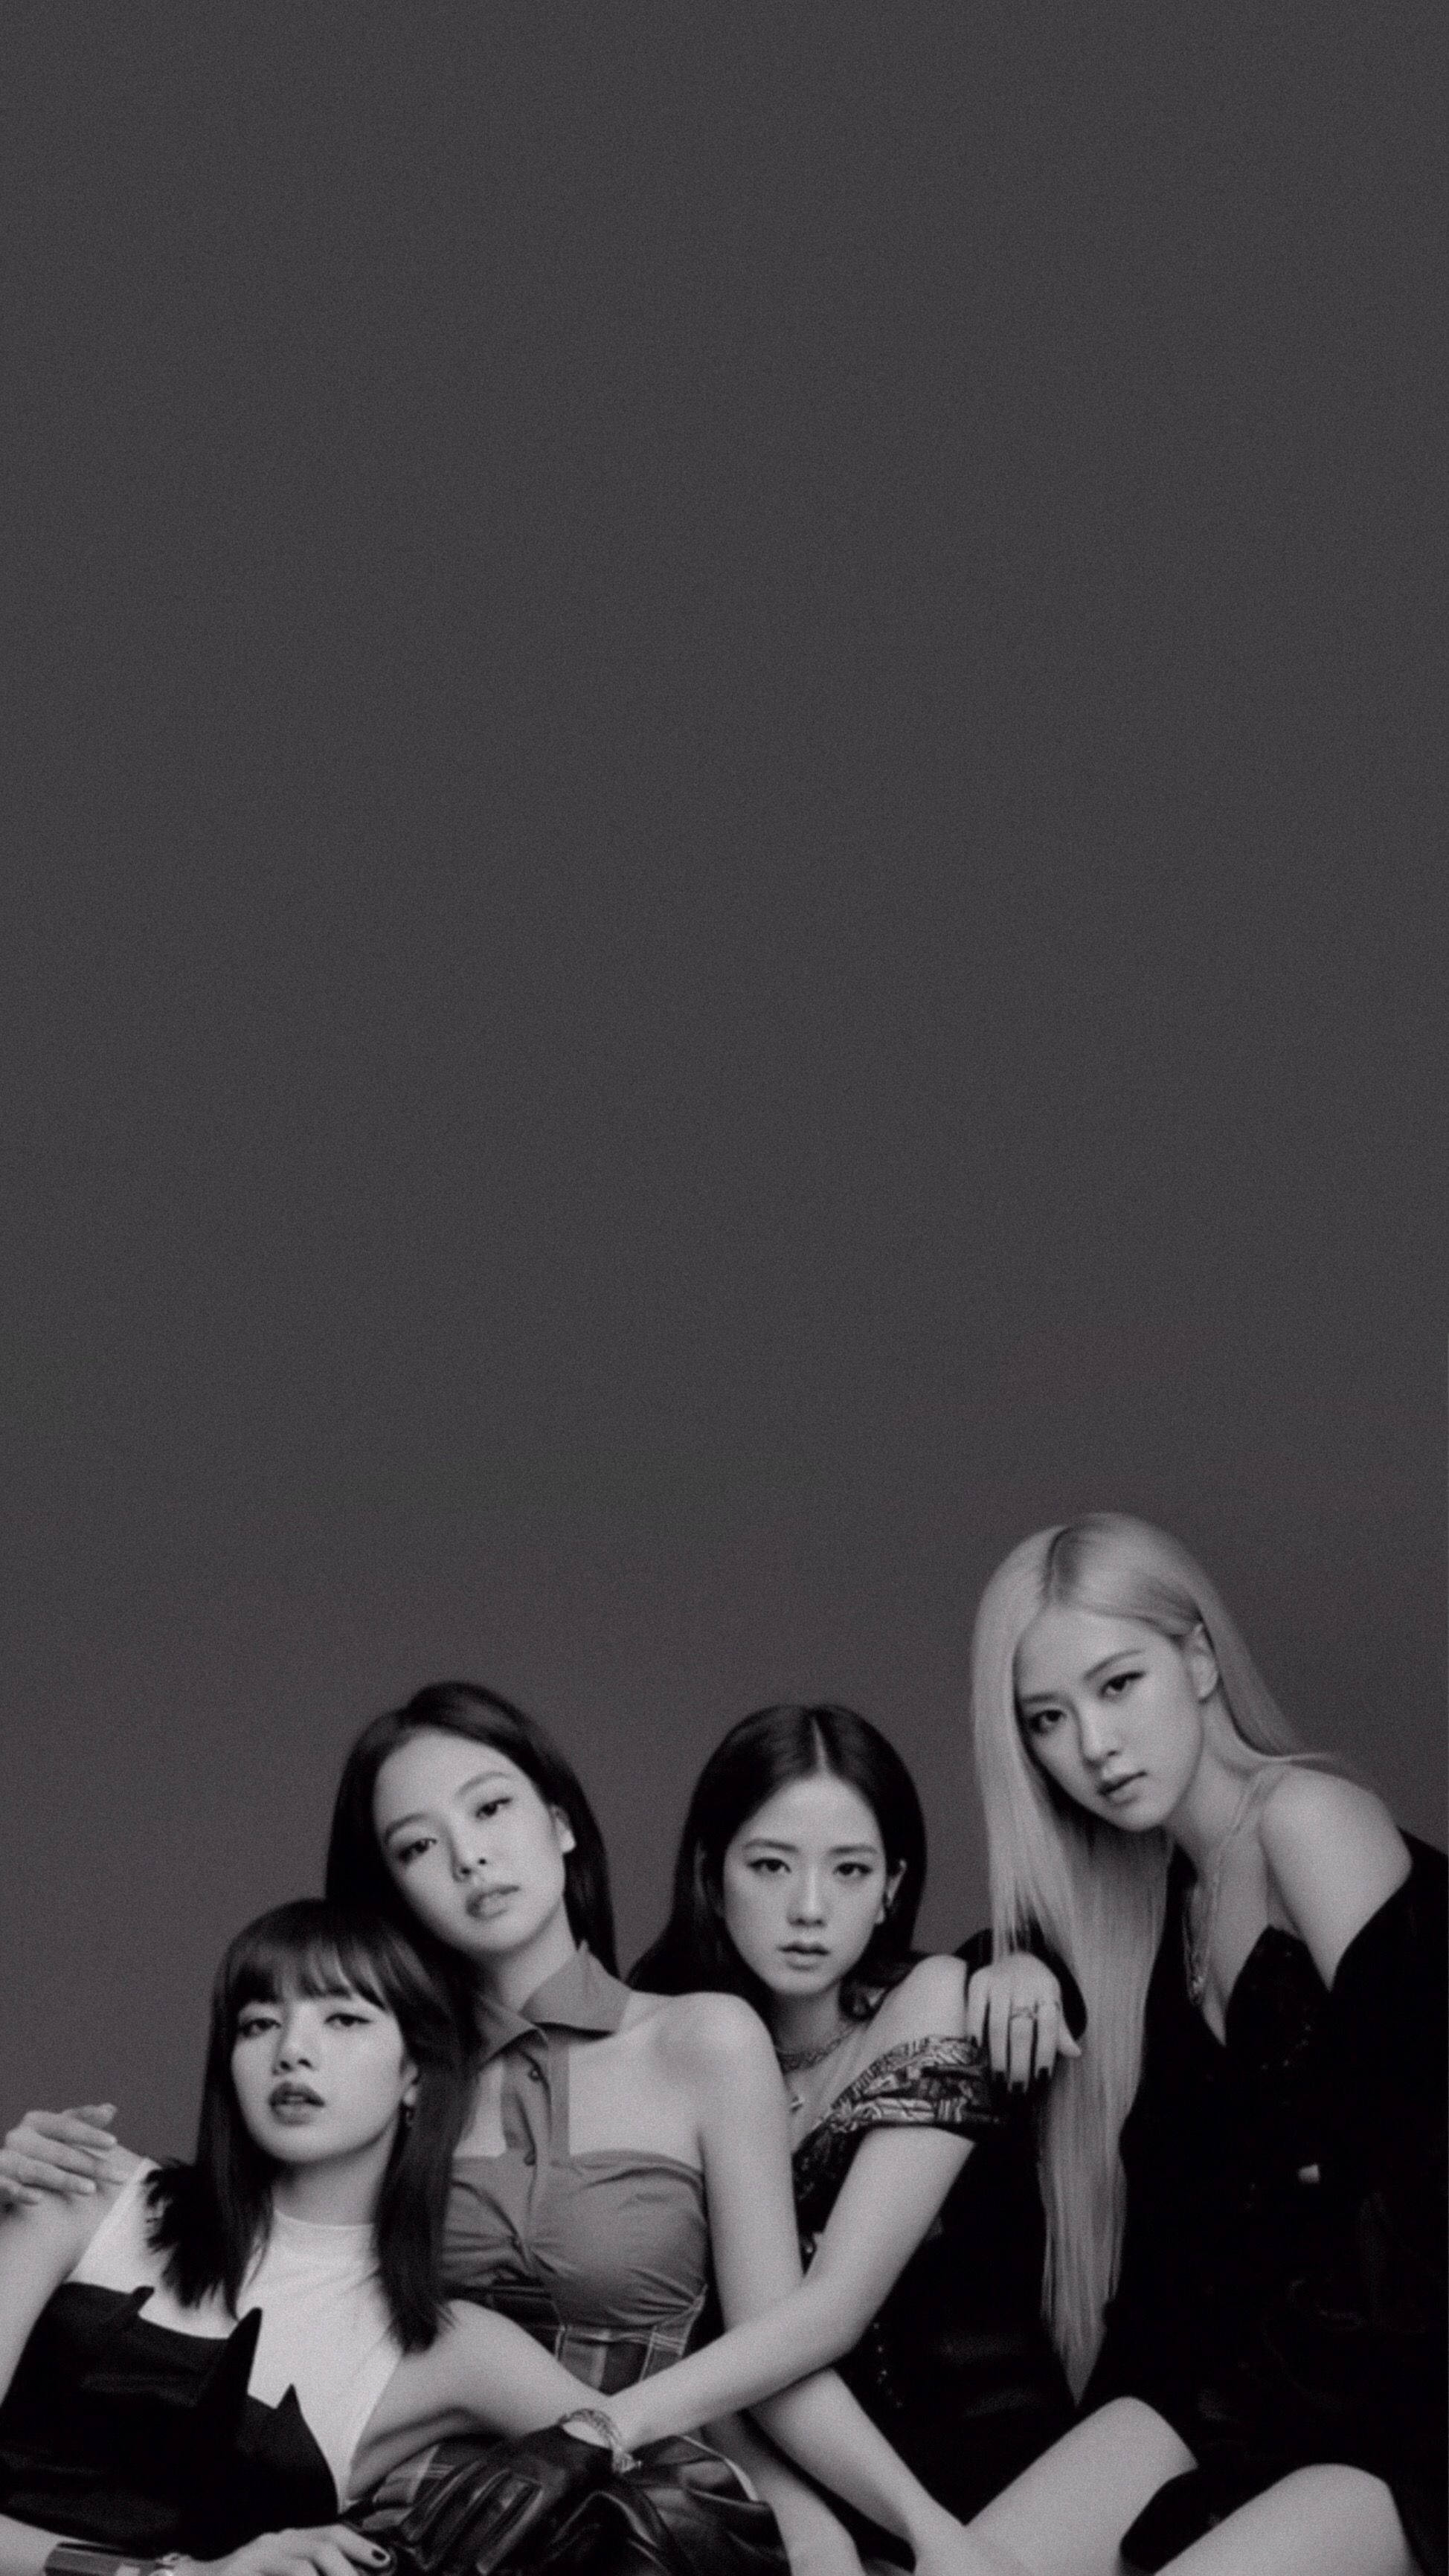 Download Black And White Blackpink Aesthetic Wallpaper